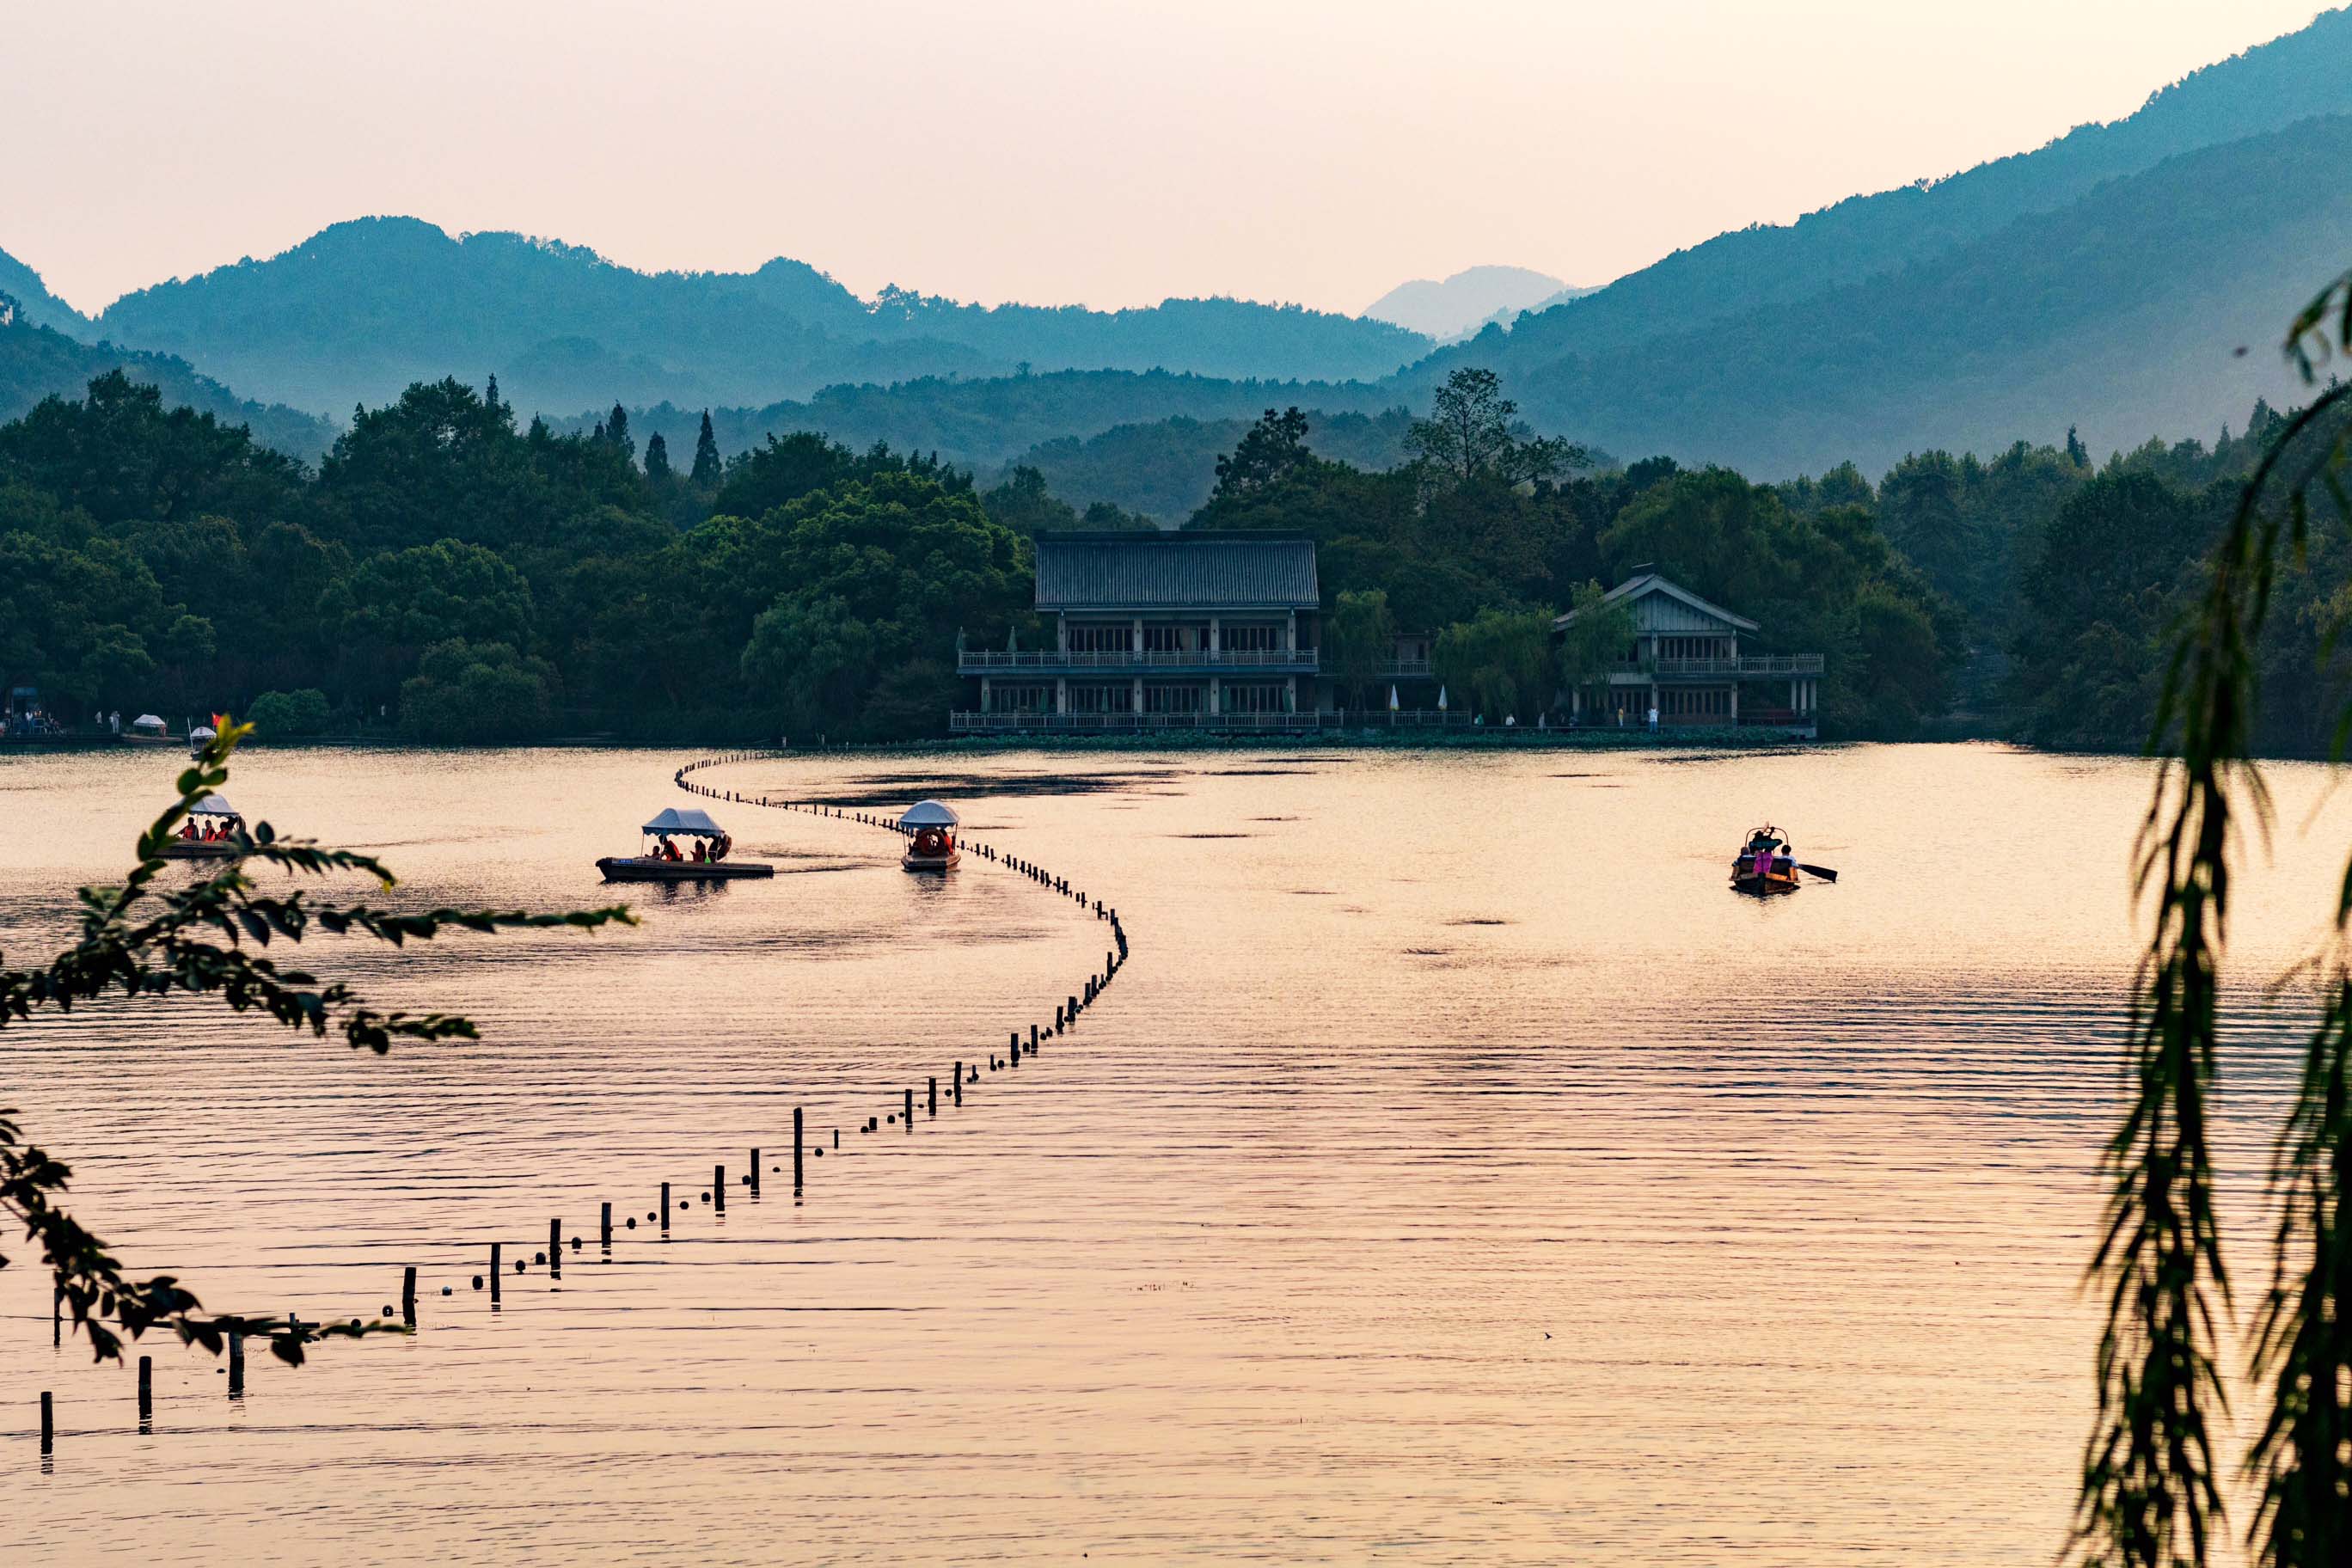 View of the water and mountains at sunset in Hangzhou, China.